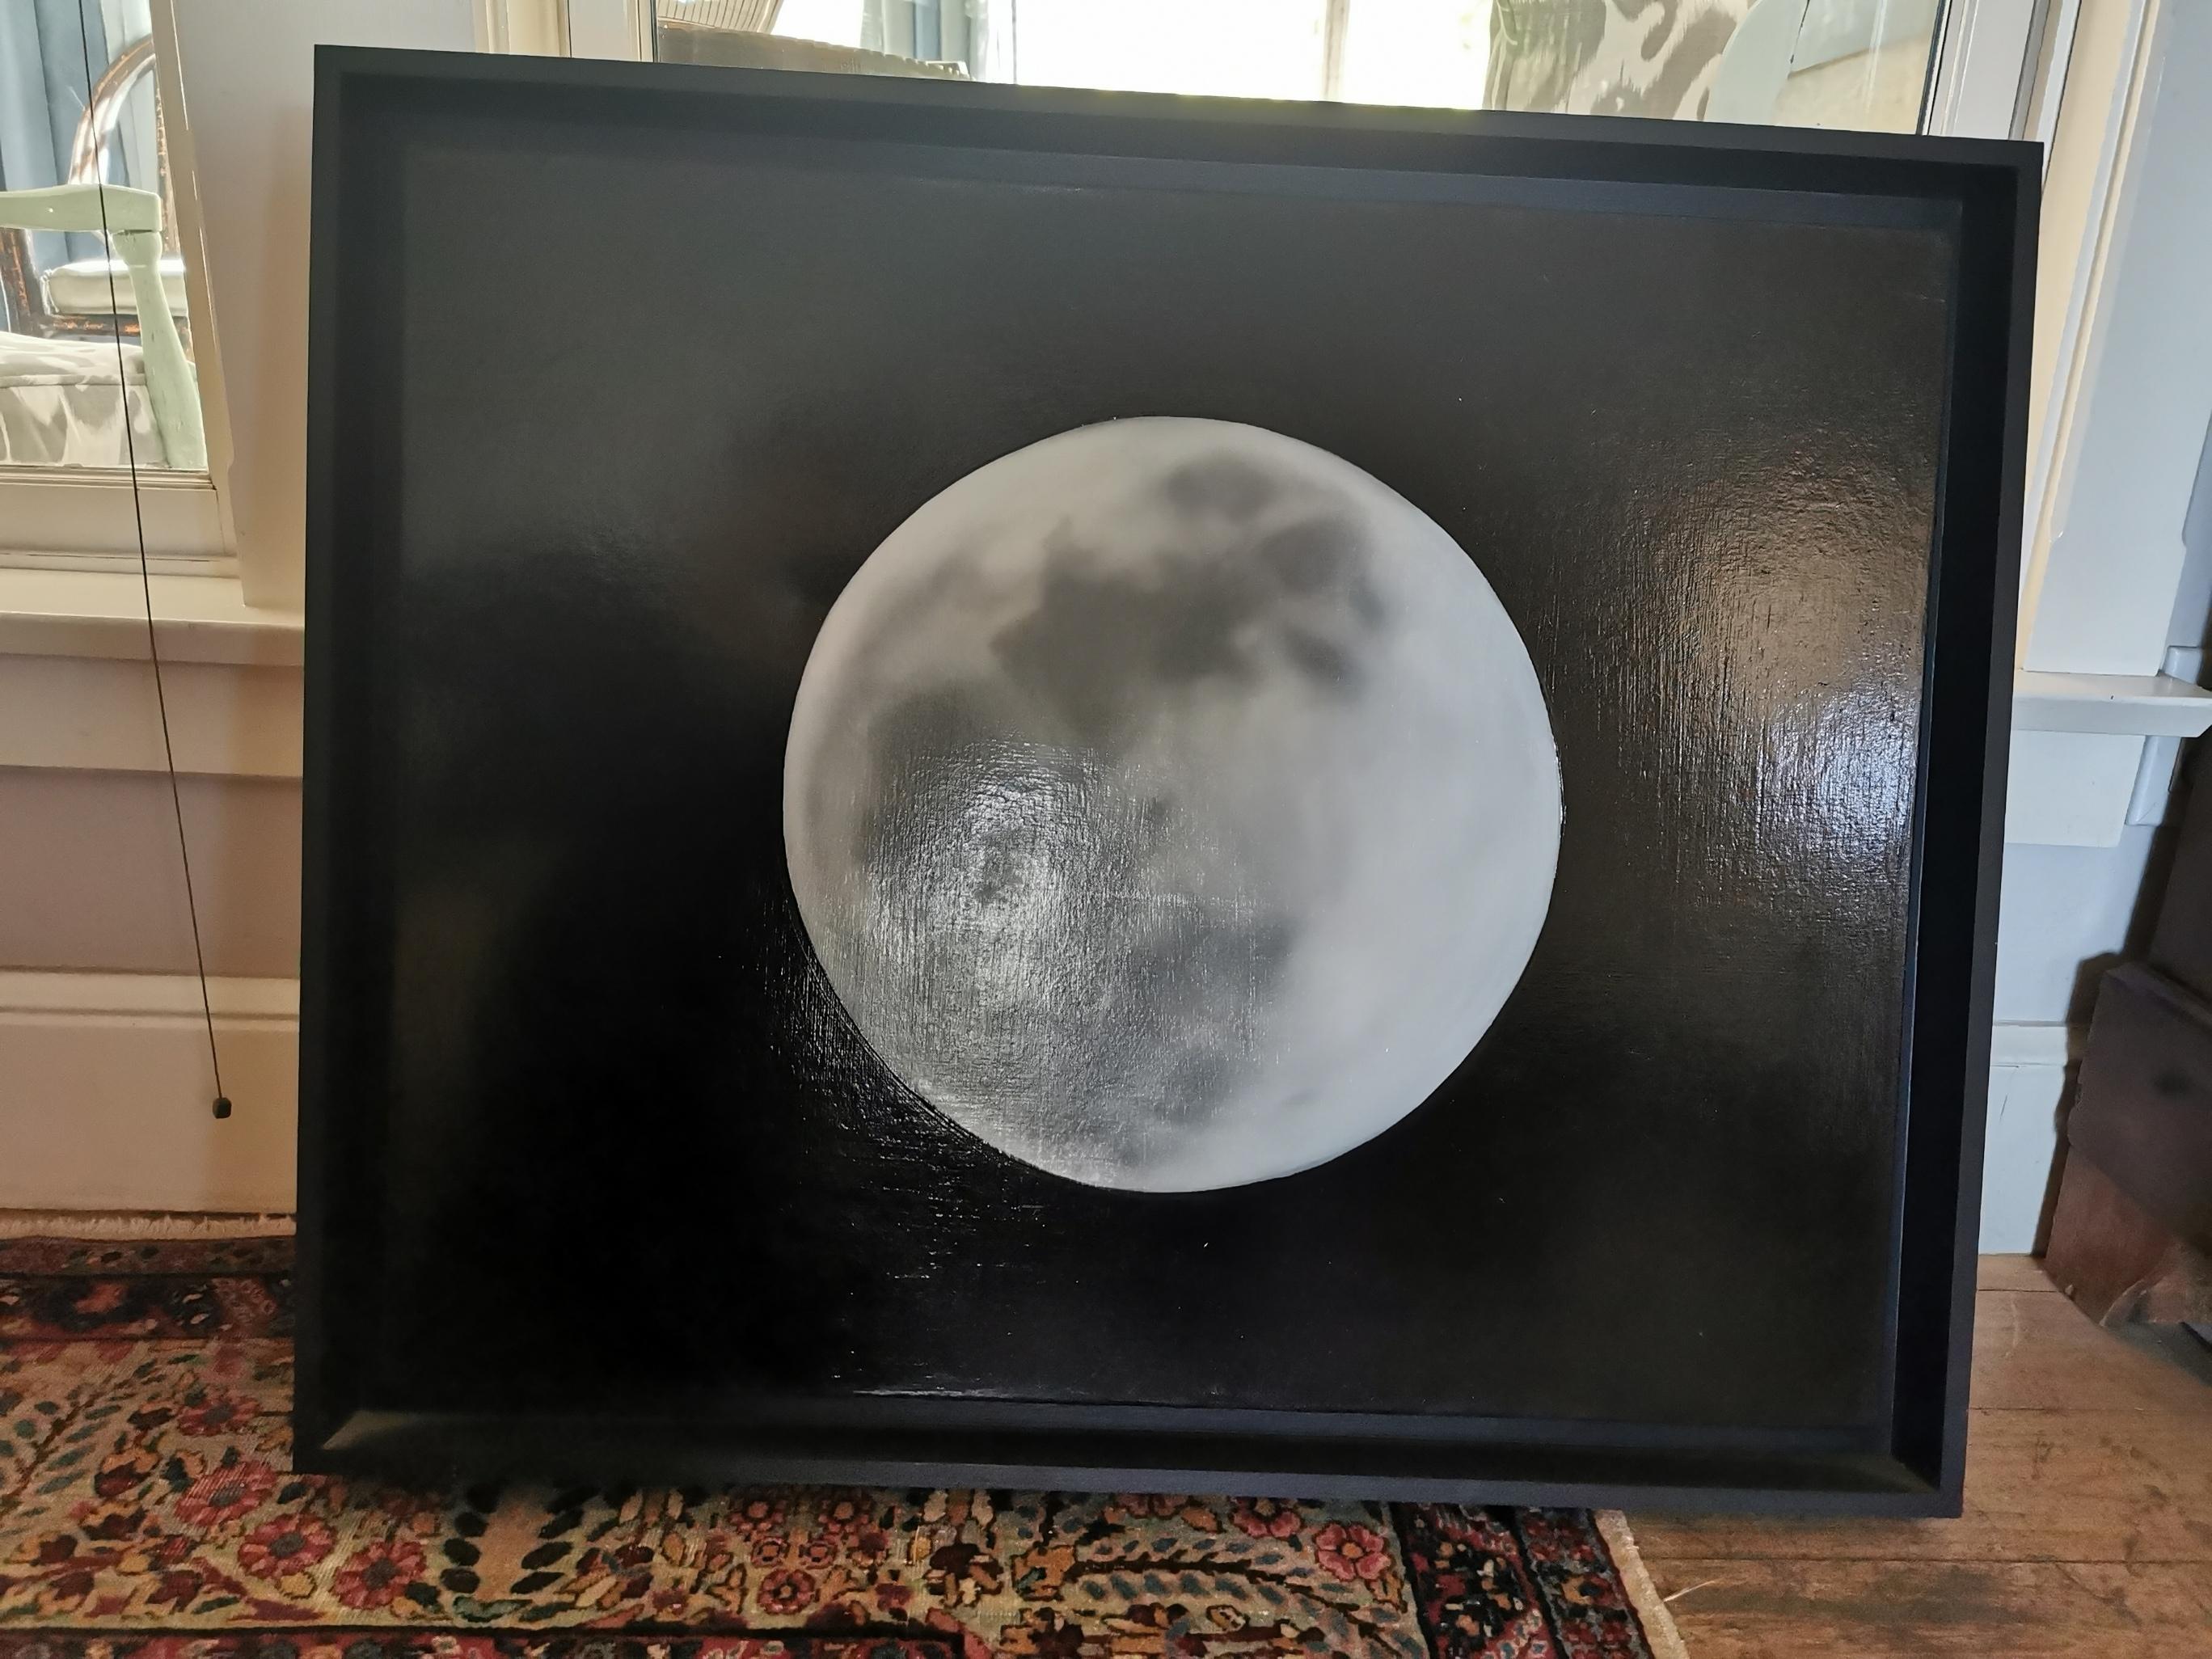 Oil painting of the moon, by late artiste David Cox, the painting is a powerful depiction of the moon and its mesmerizing details and shadows when full. The painting is realistic and very communicative. The frame was done by the artist himself.